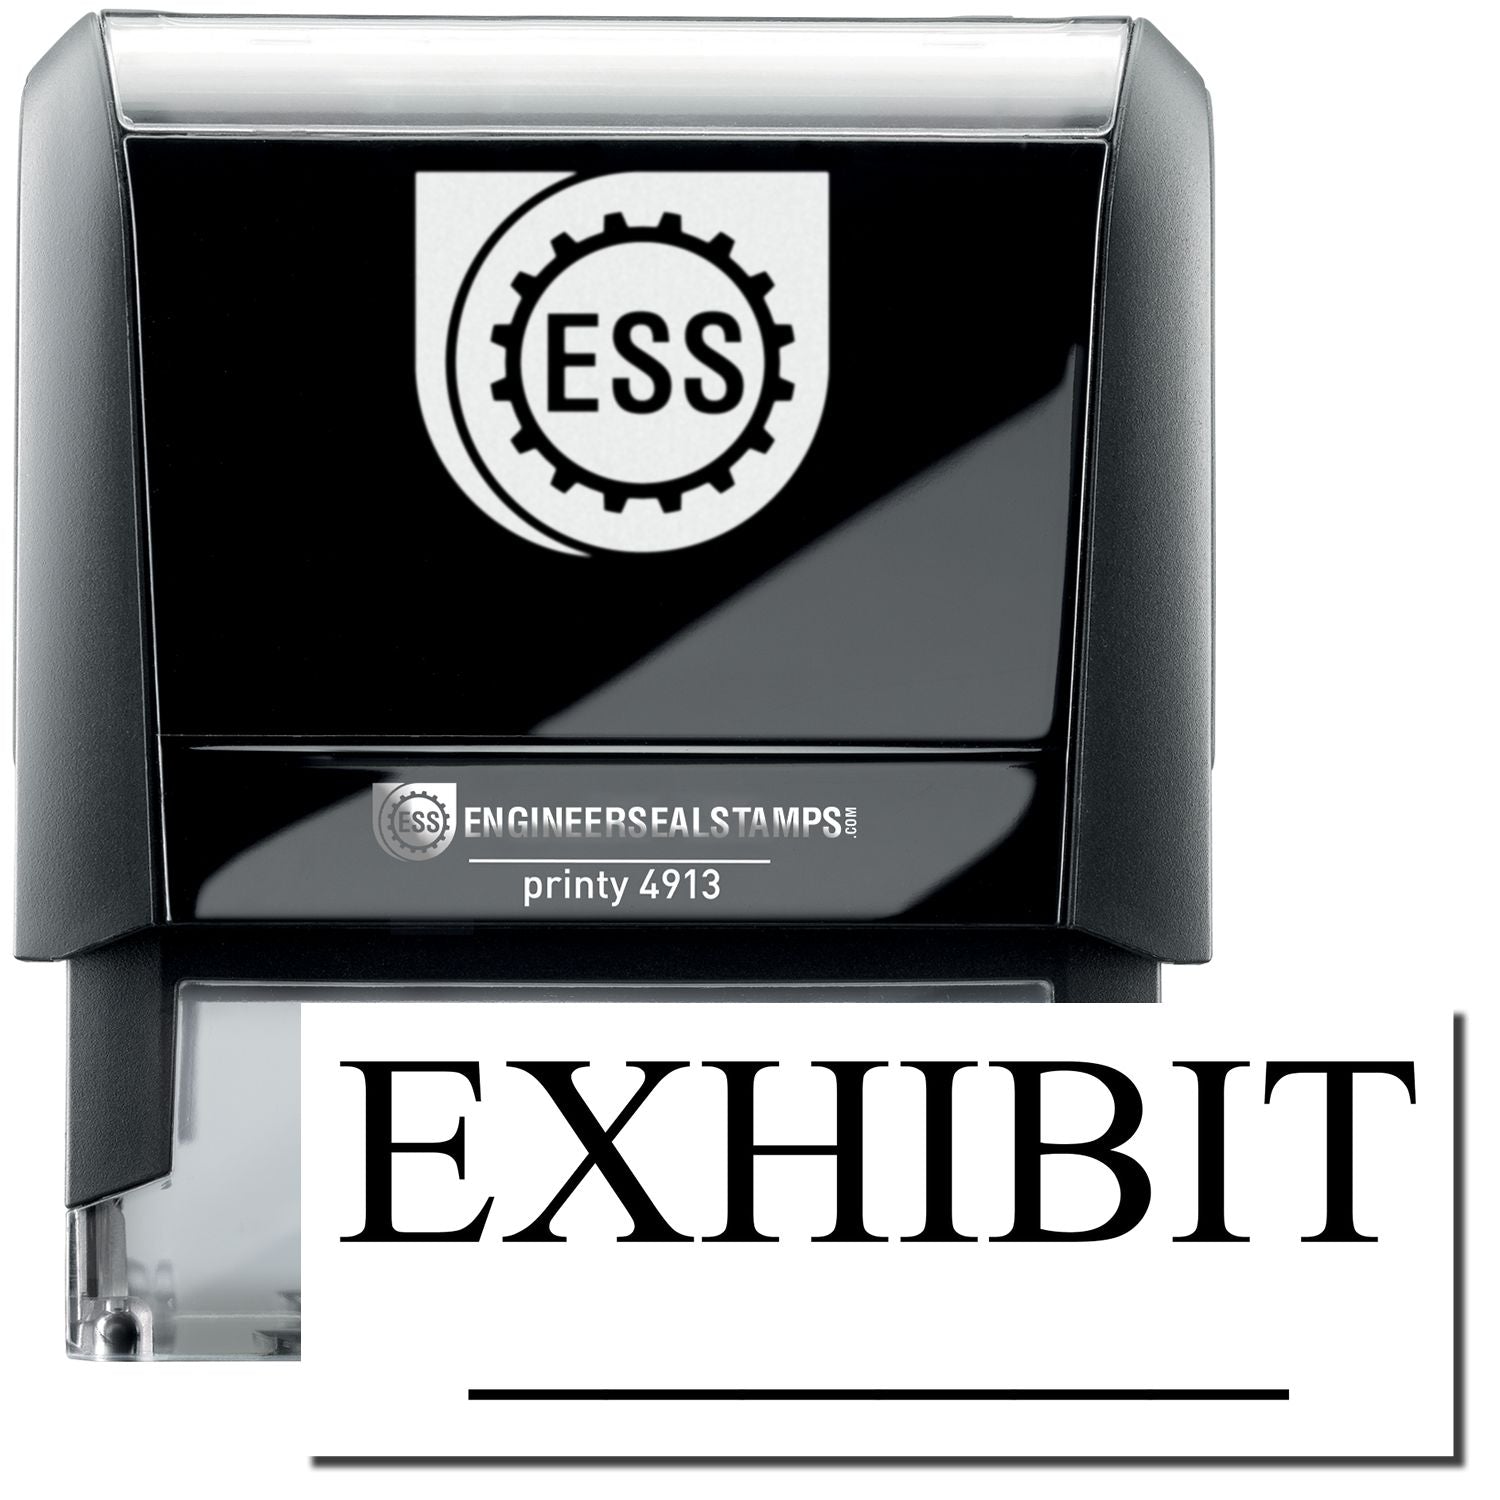 A self-inking stamp with a stamped image showing how the text "EXHIBIT" in a large bold font with a line is displayed by it.